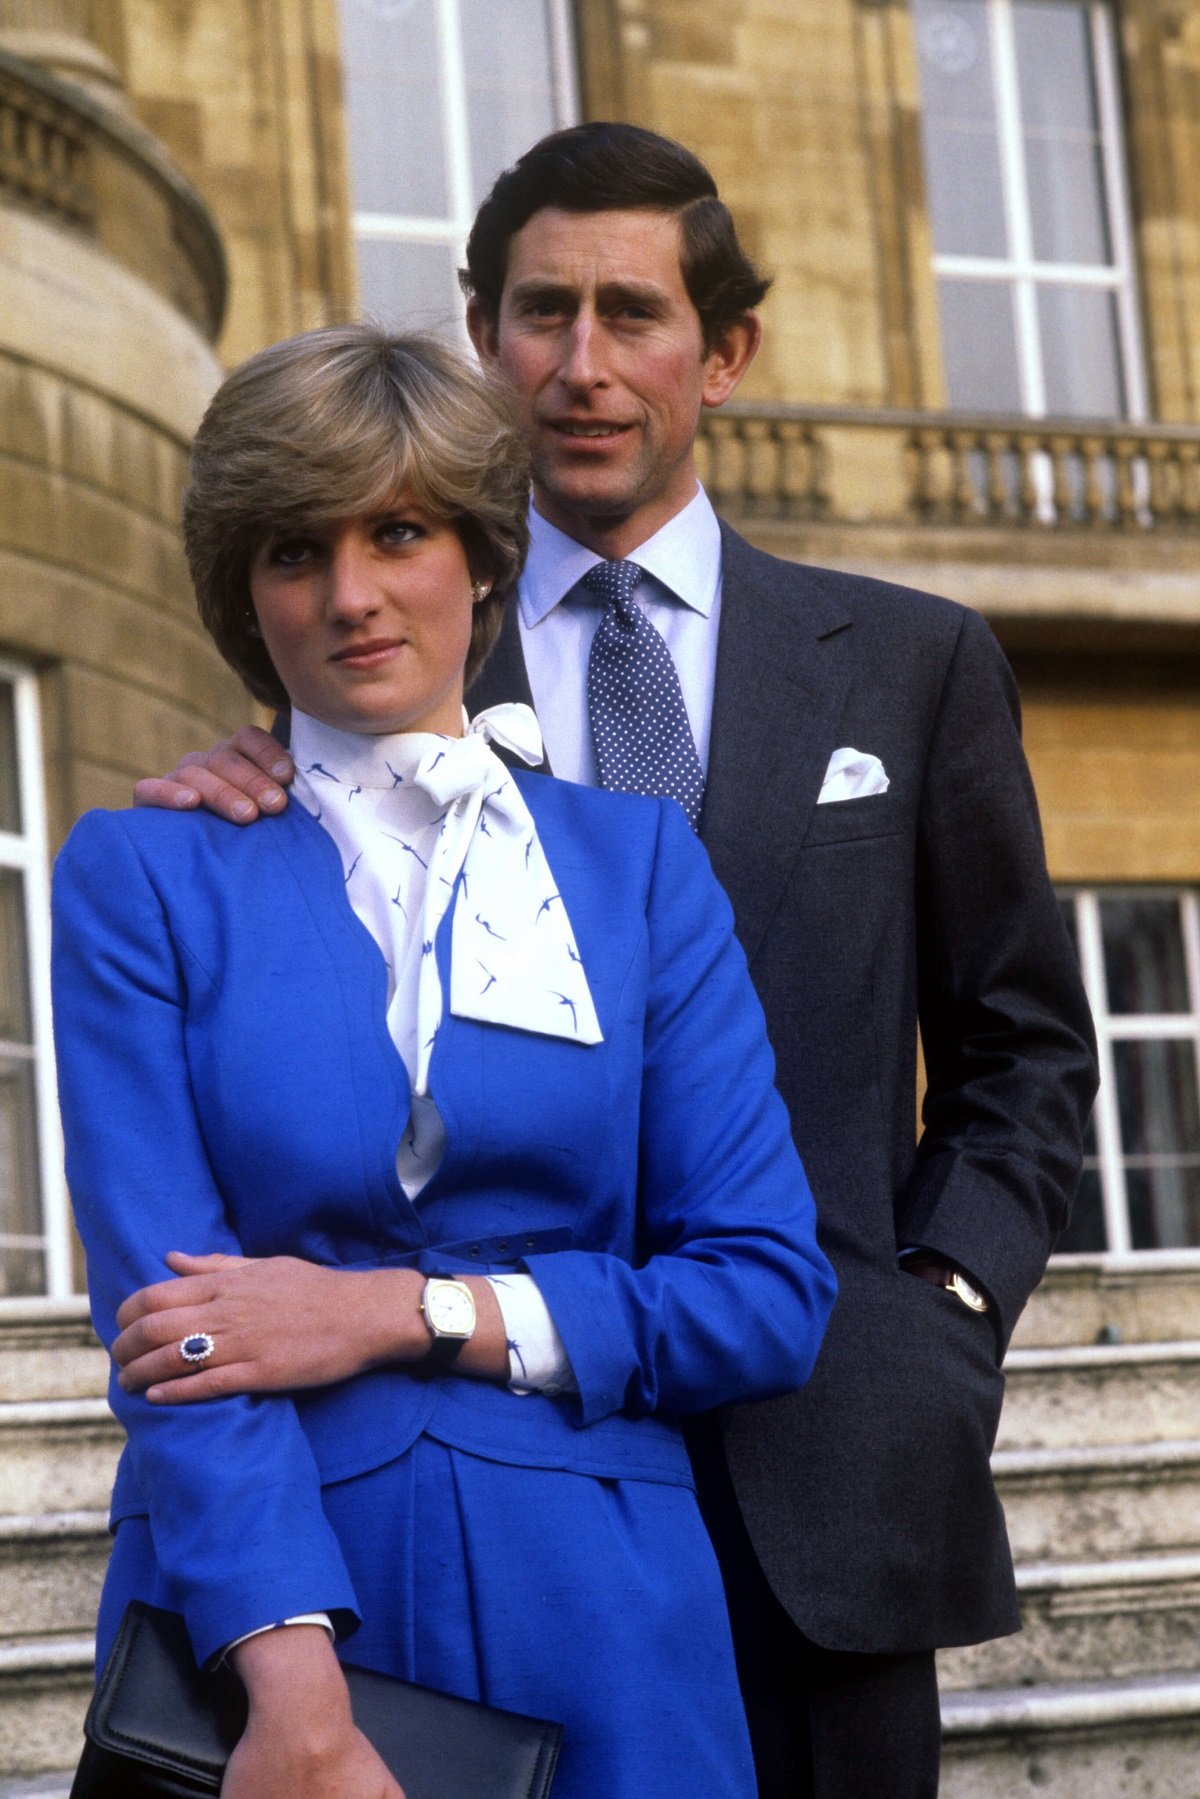 Prince Charles and Lady Diana Spencer, wearing the diamond and sapphire engagement ring he gave her, after announcing their engagement